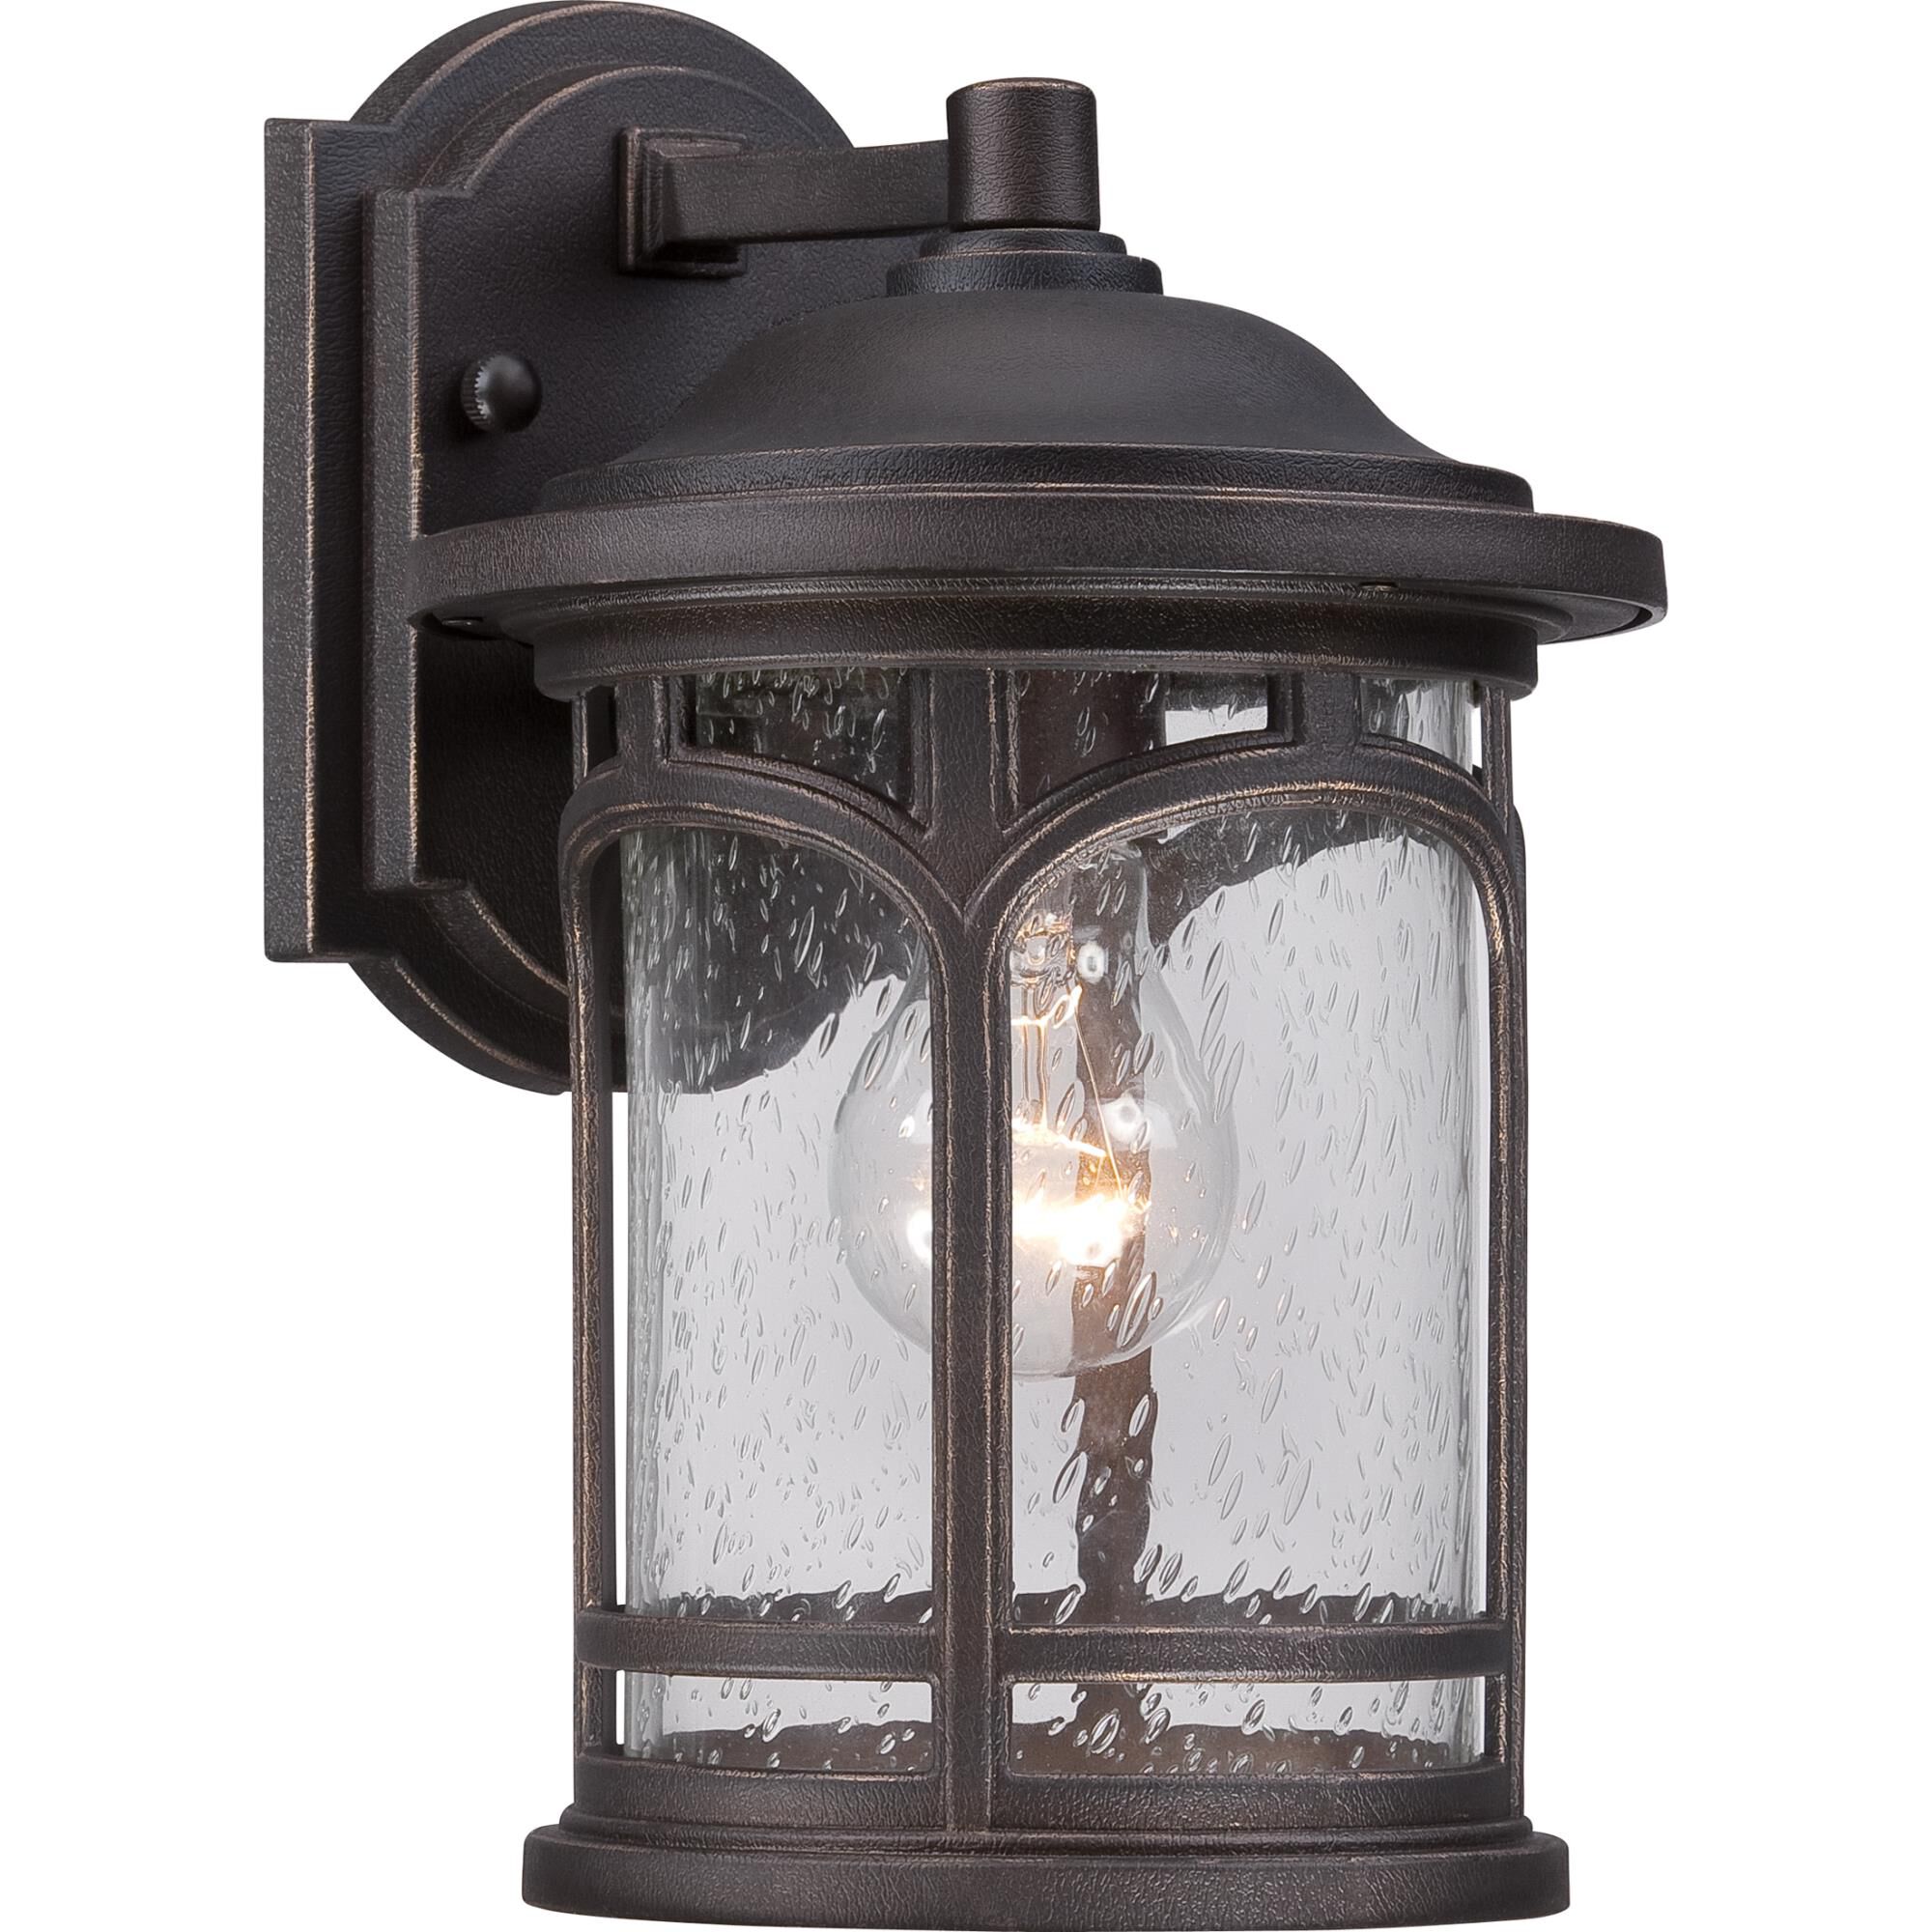 Photos - Chandelier / Lamp Quoizel Marblehead 11 Inch Tall Outdoor Wall Light Marblehead - MBH8407PN 